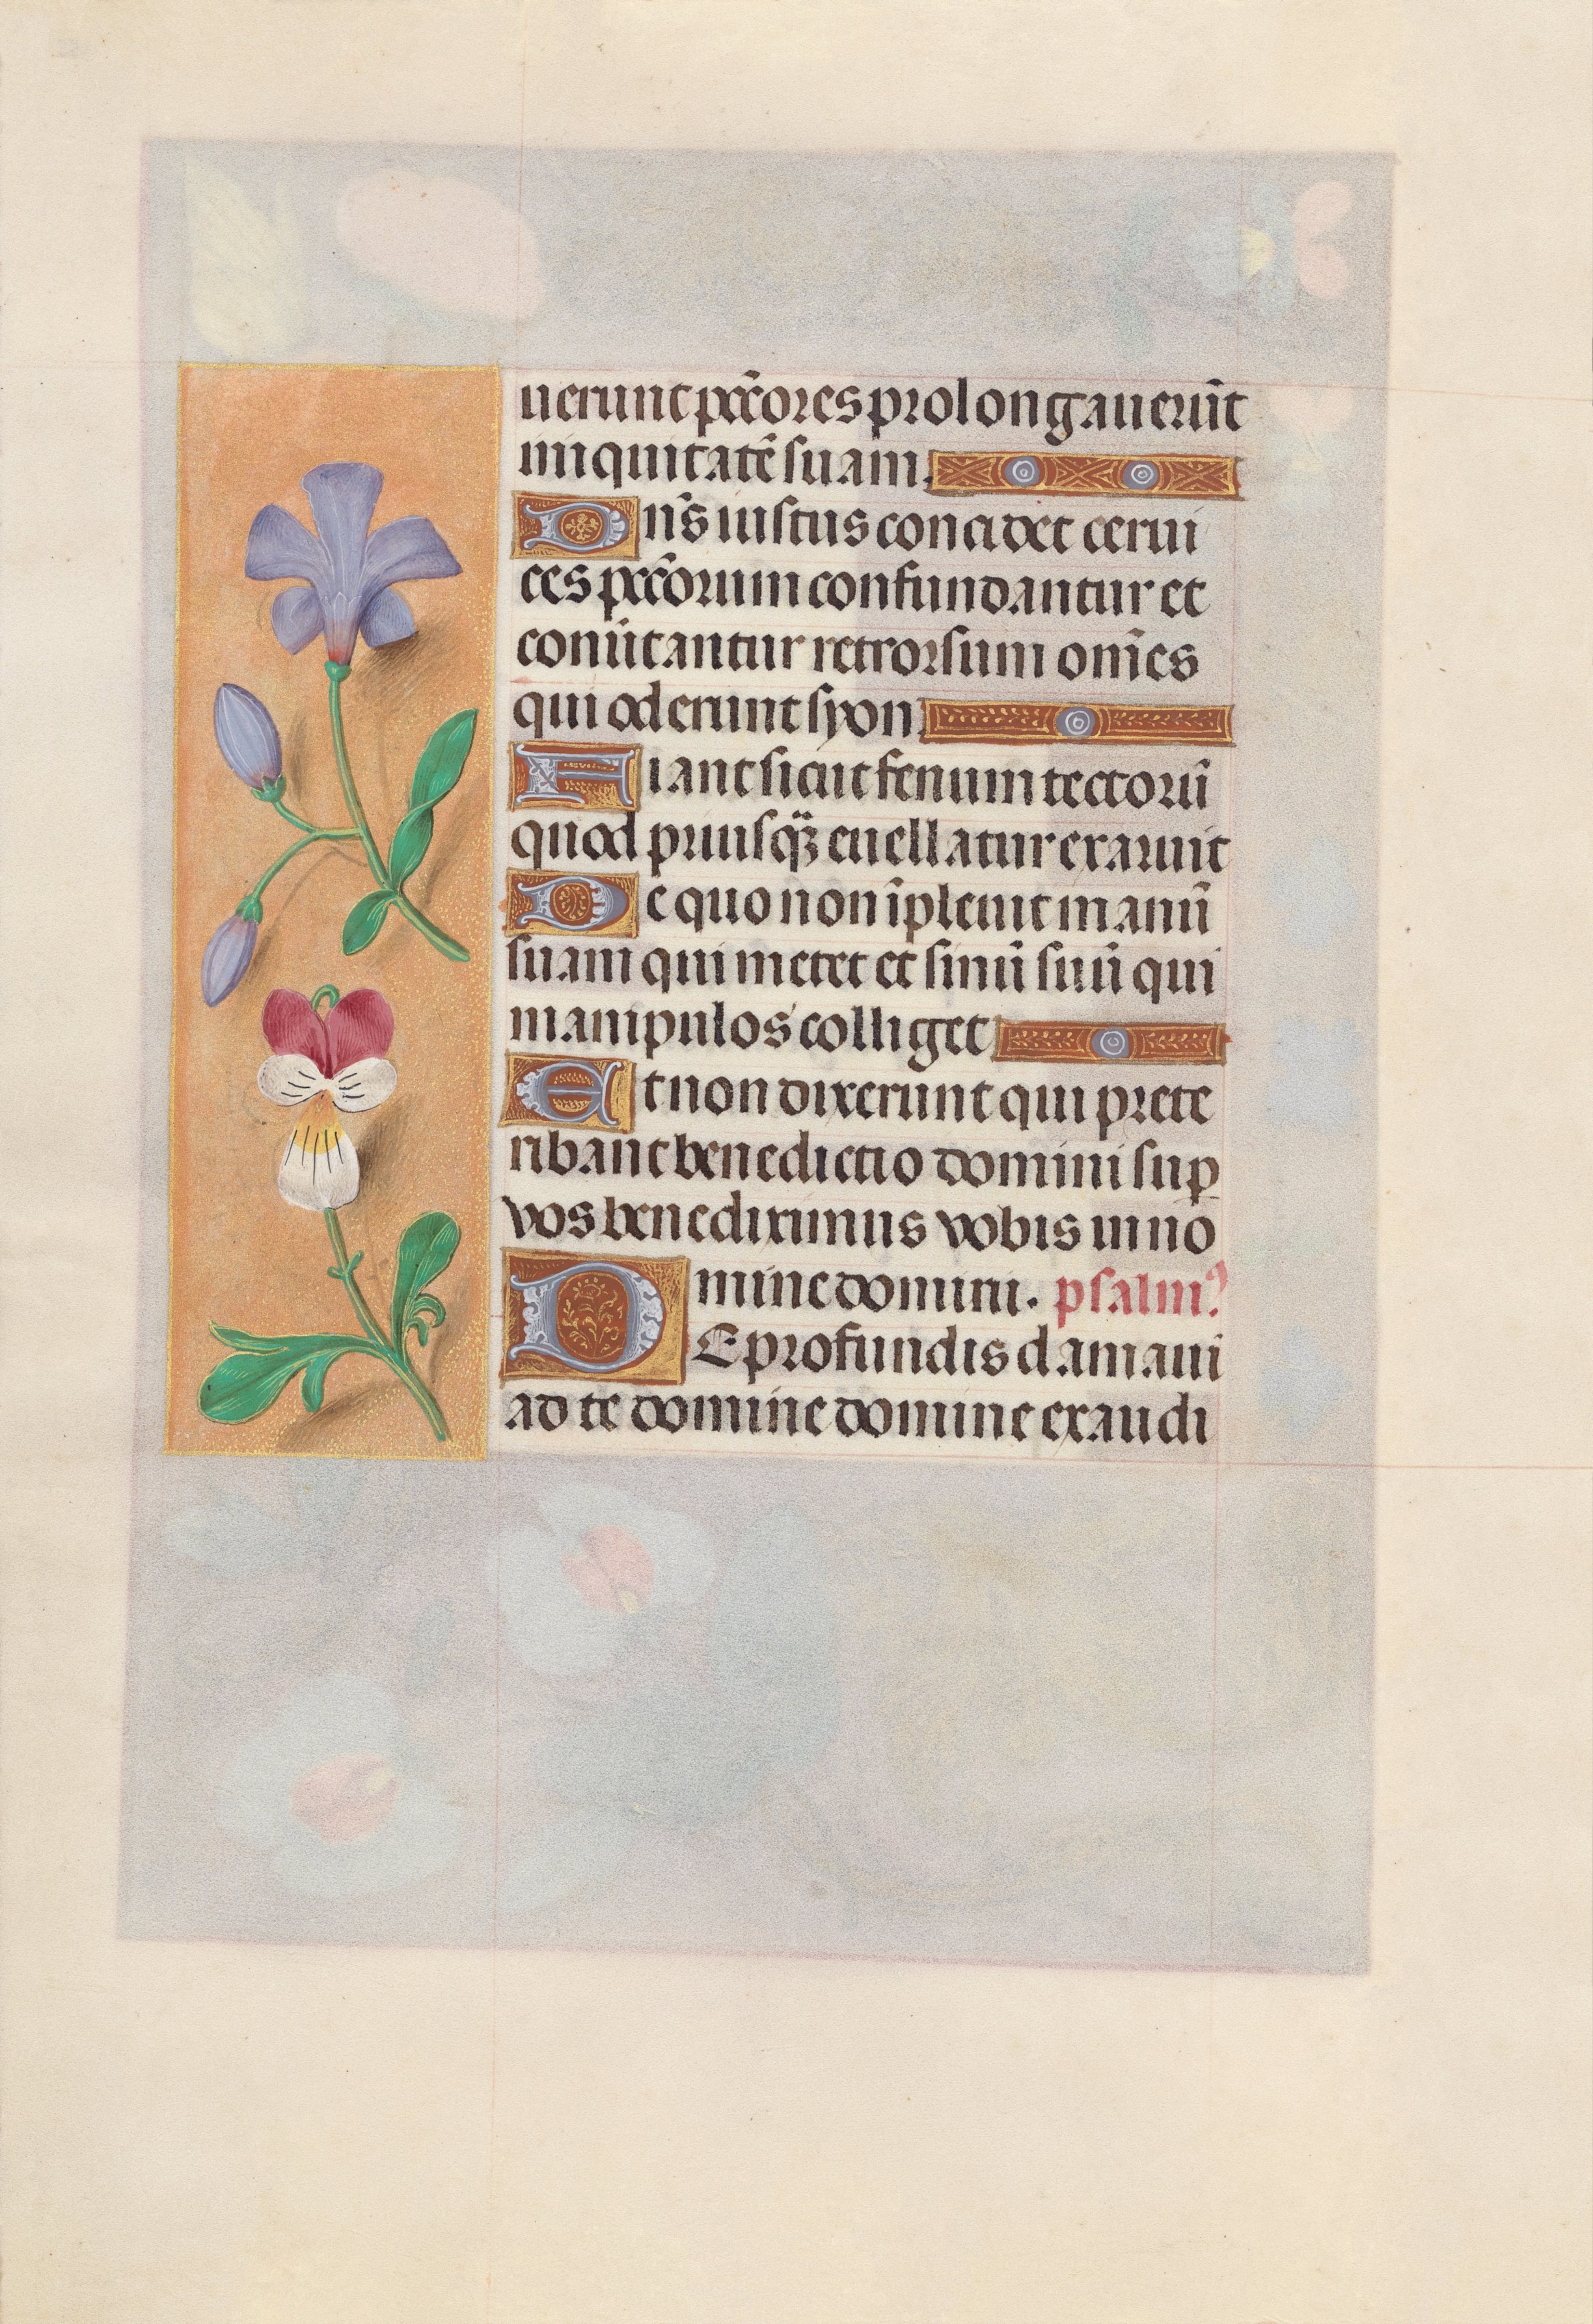 Hours of Queen Isabella the Catholic, Queen of Spain:  Fol. 155v